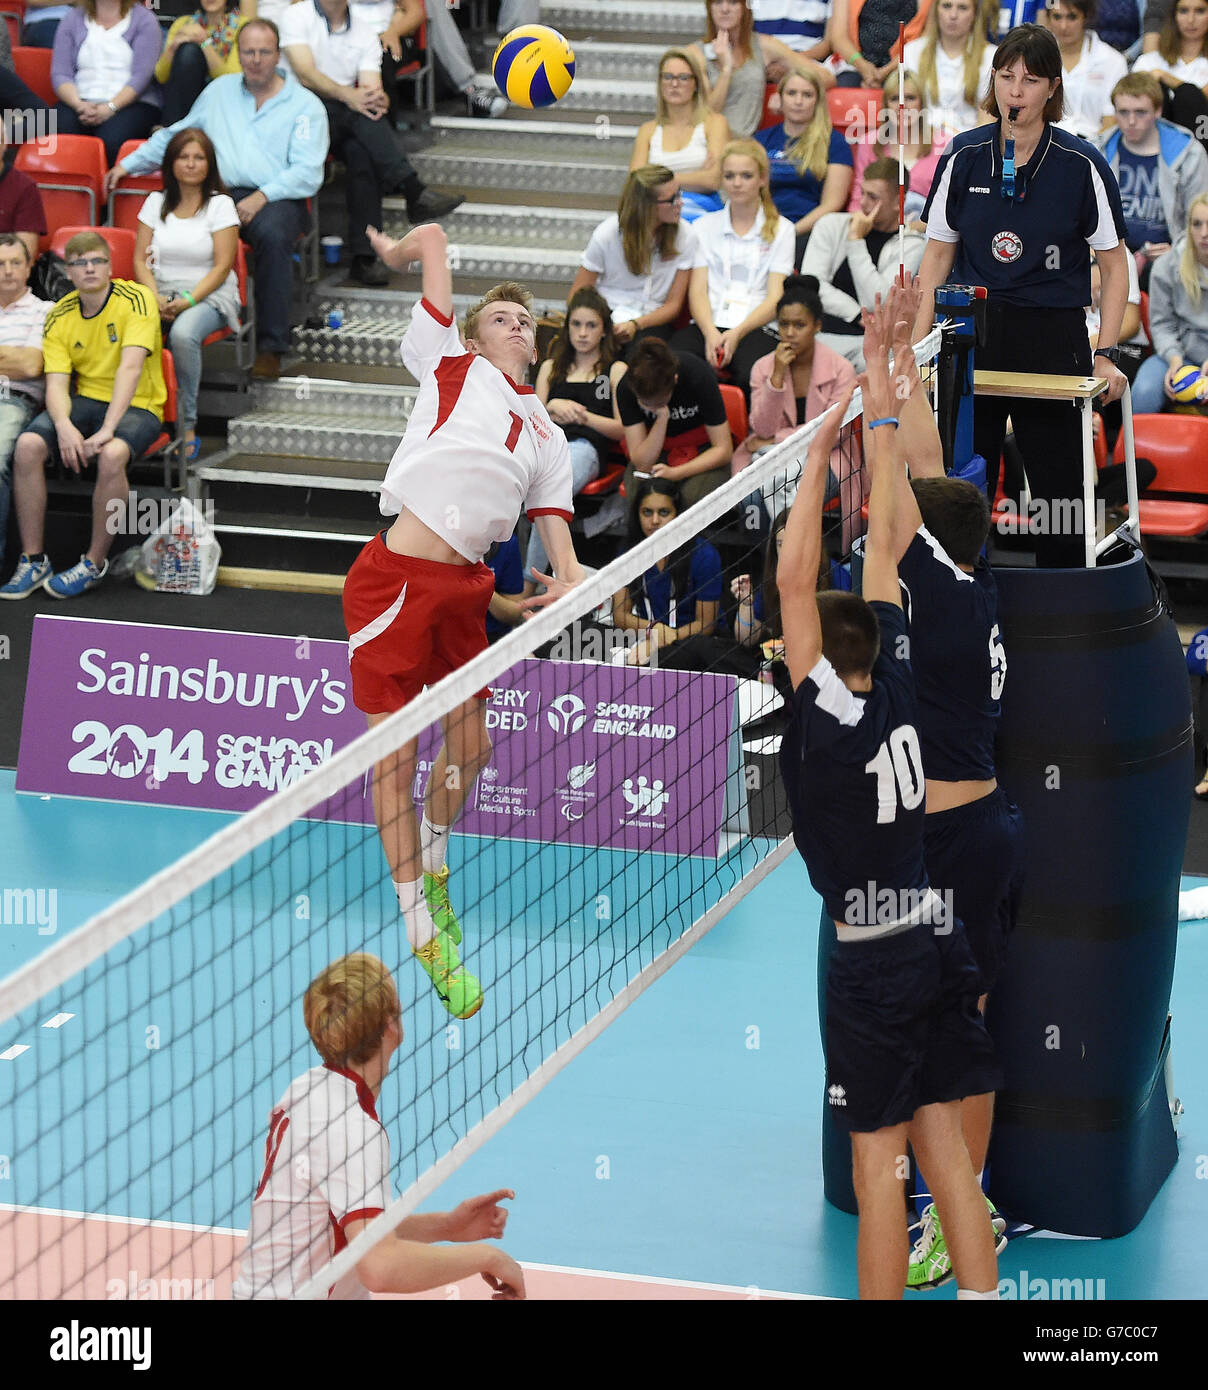 England Junoir Men's William Van Wingerden smashes the ball during the game with Scotland West Boys, in the final of the Volleyball, during the Sainsbury's 2014 School Games at The Sugden Centre, Manchester. Stock Photo